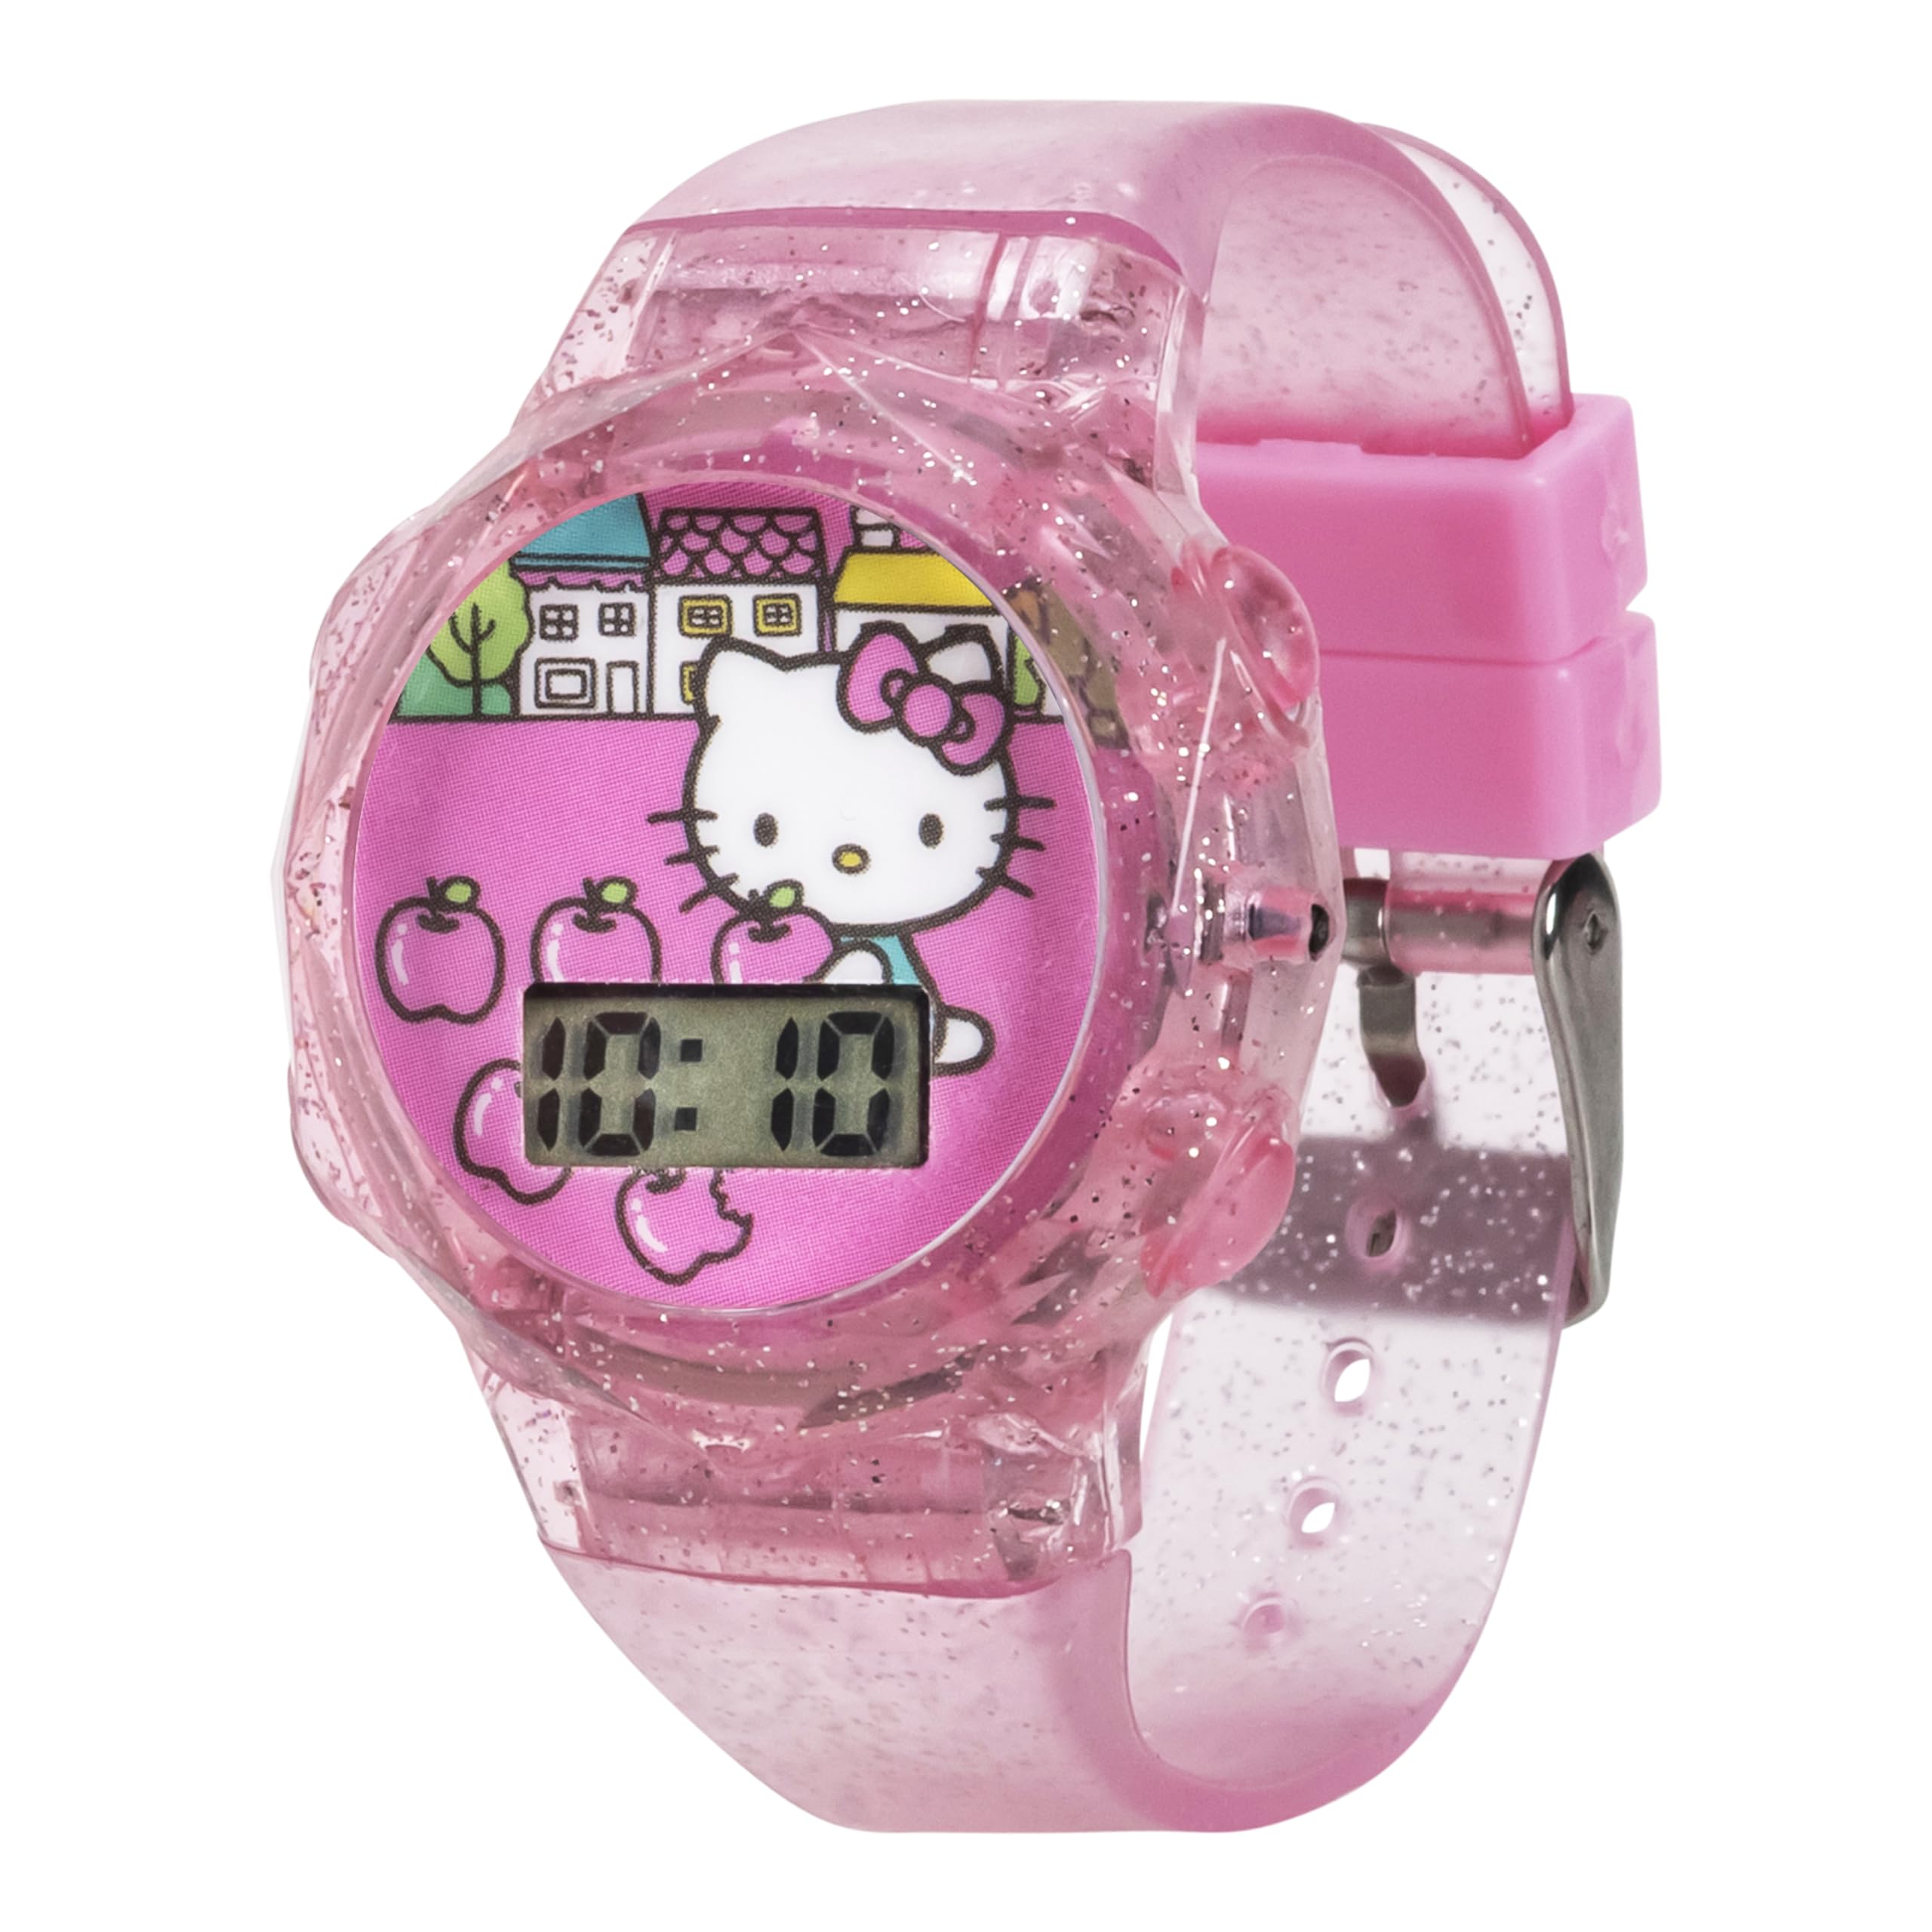 Accutime Hello Kitty Digital LCD Quartz Kids Pink Watch for Girls with Pink Glitter Hello Kitty and Friends Band Strap (Model: HK4168AZ)